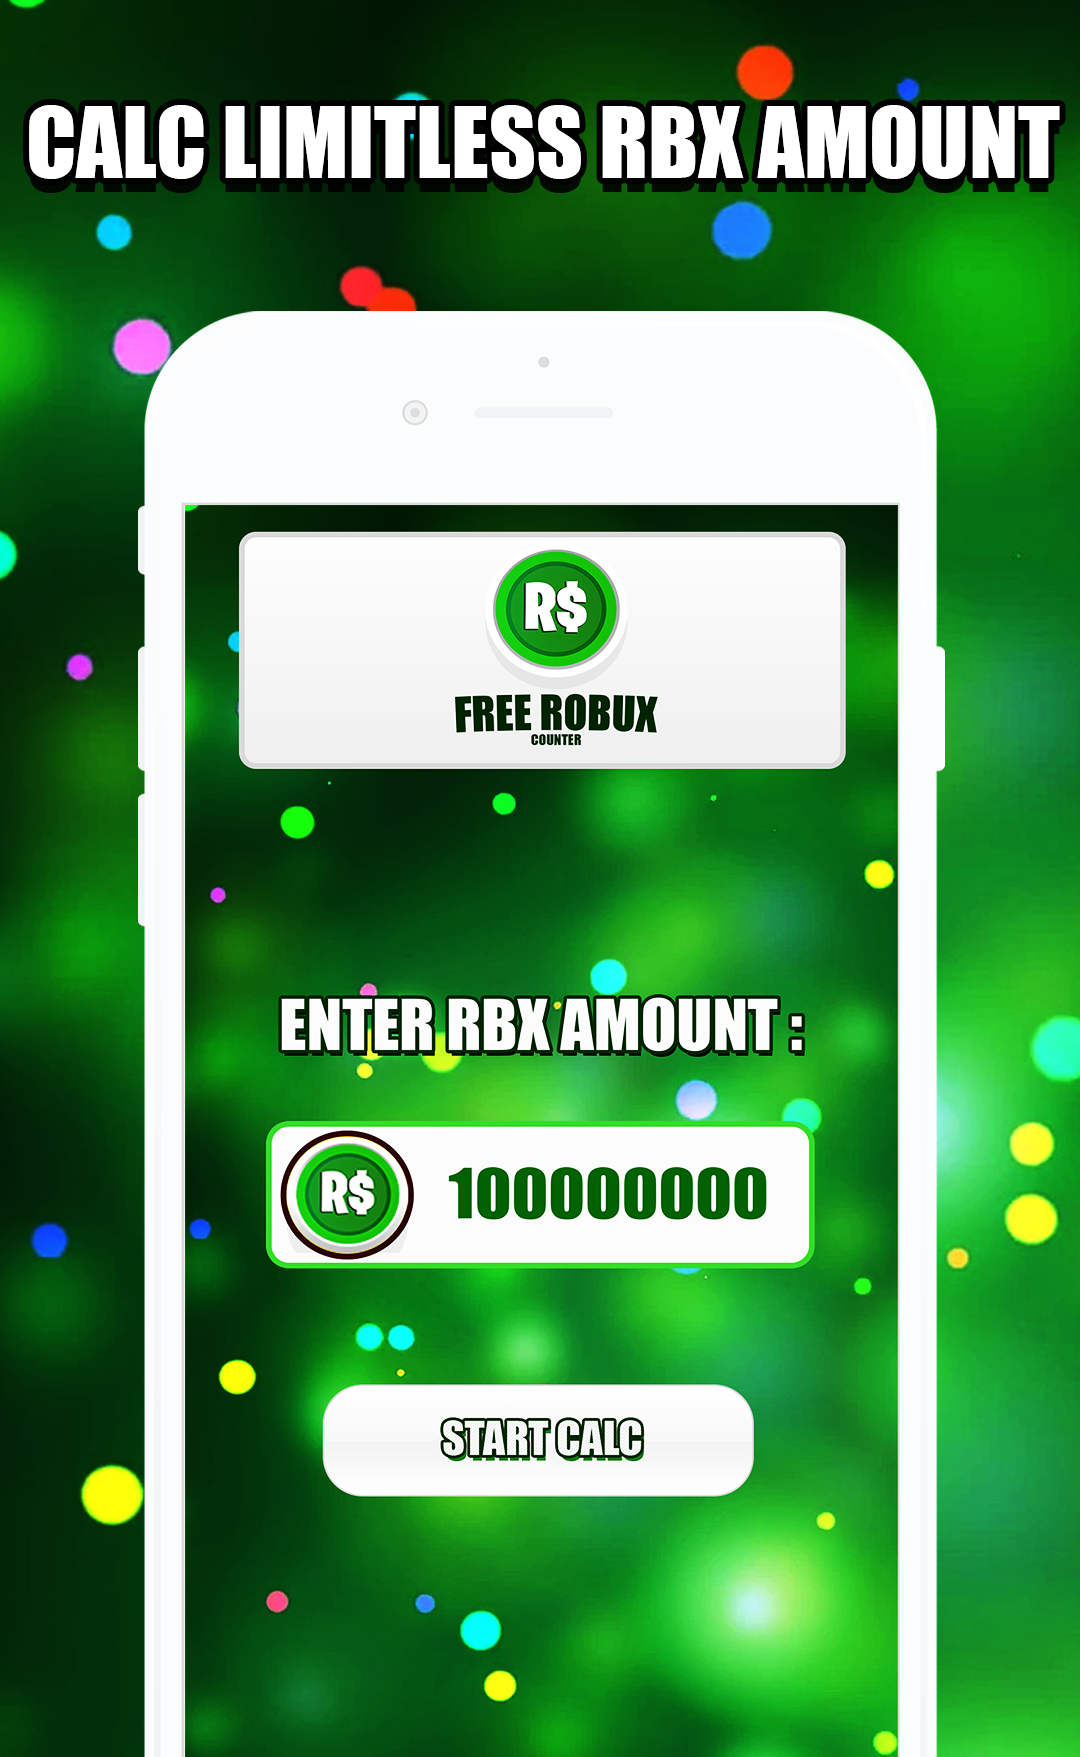 Free Robux Calc For Roblox S Rbx 2020 Pre Register Download Taptap - dreamcraft roblox free robux generator simulator